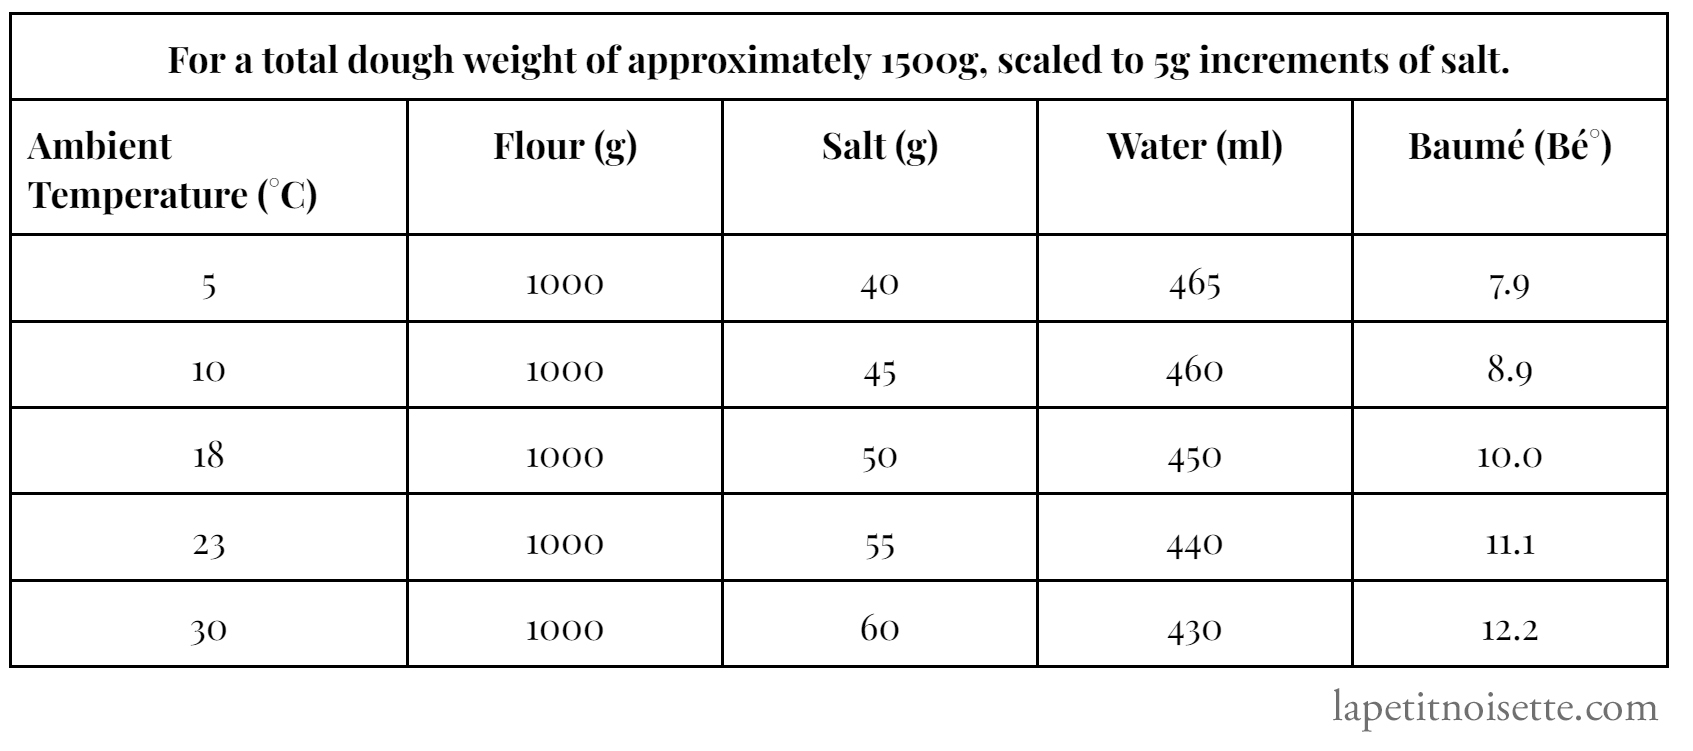 Udon hydration and salt table based on ambient temperature.